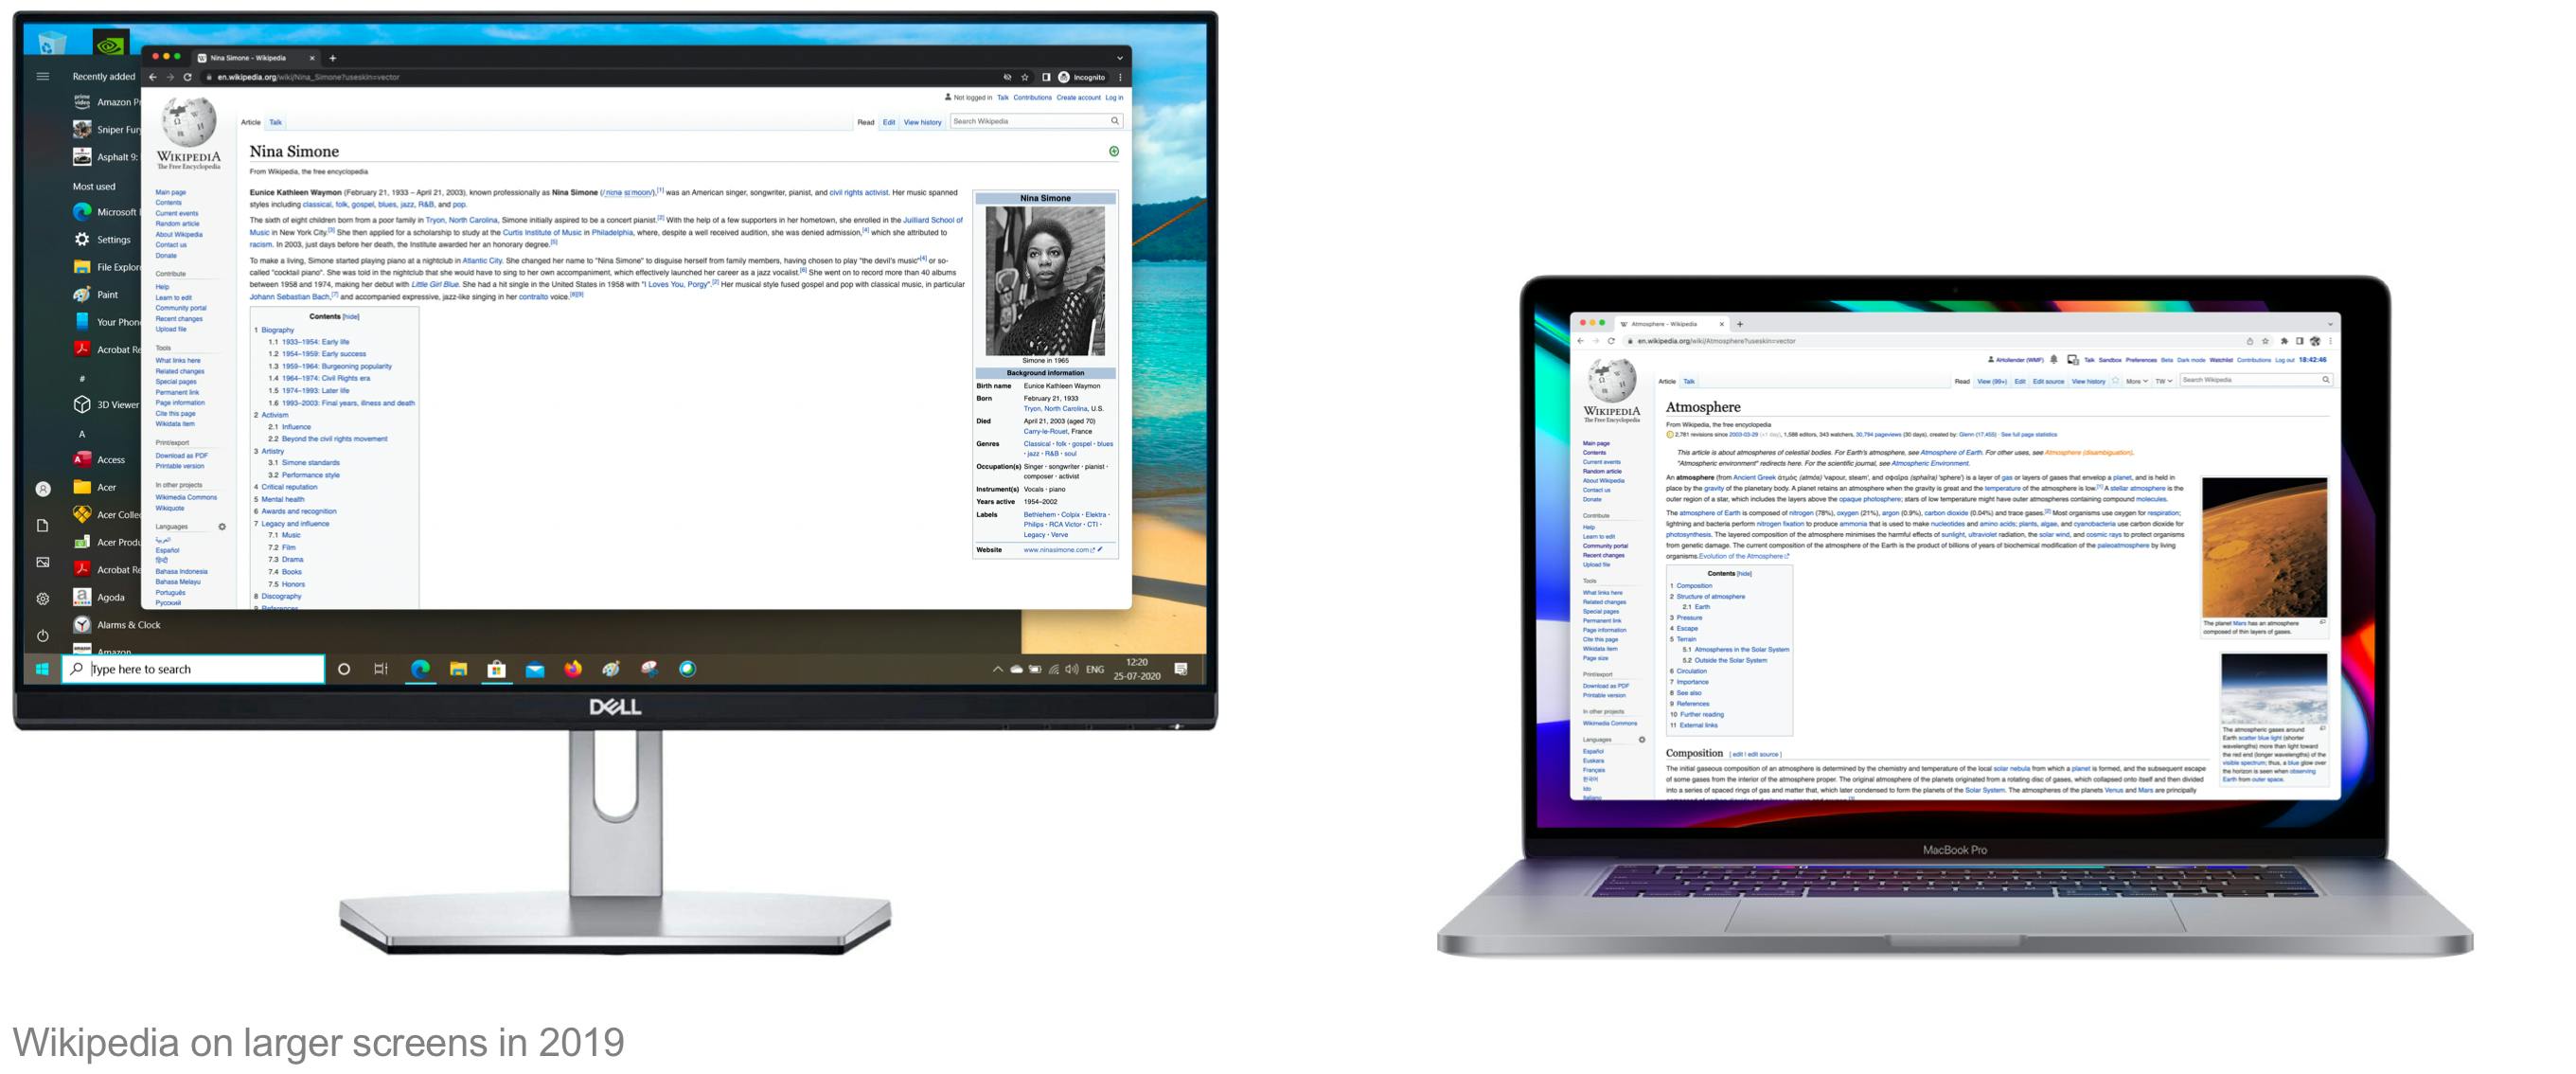 Wikipedia on a larger monitor and laptop screen in 2019